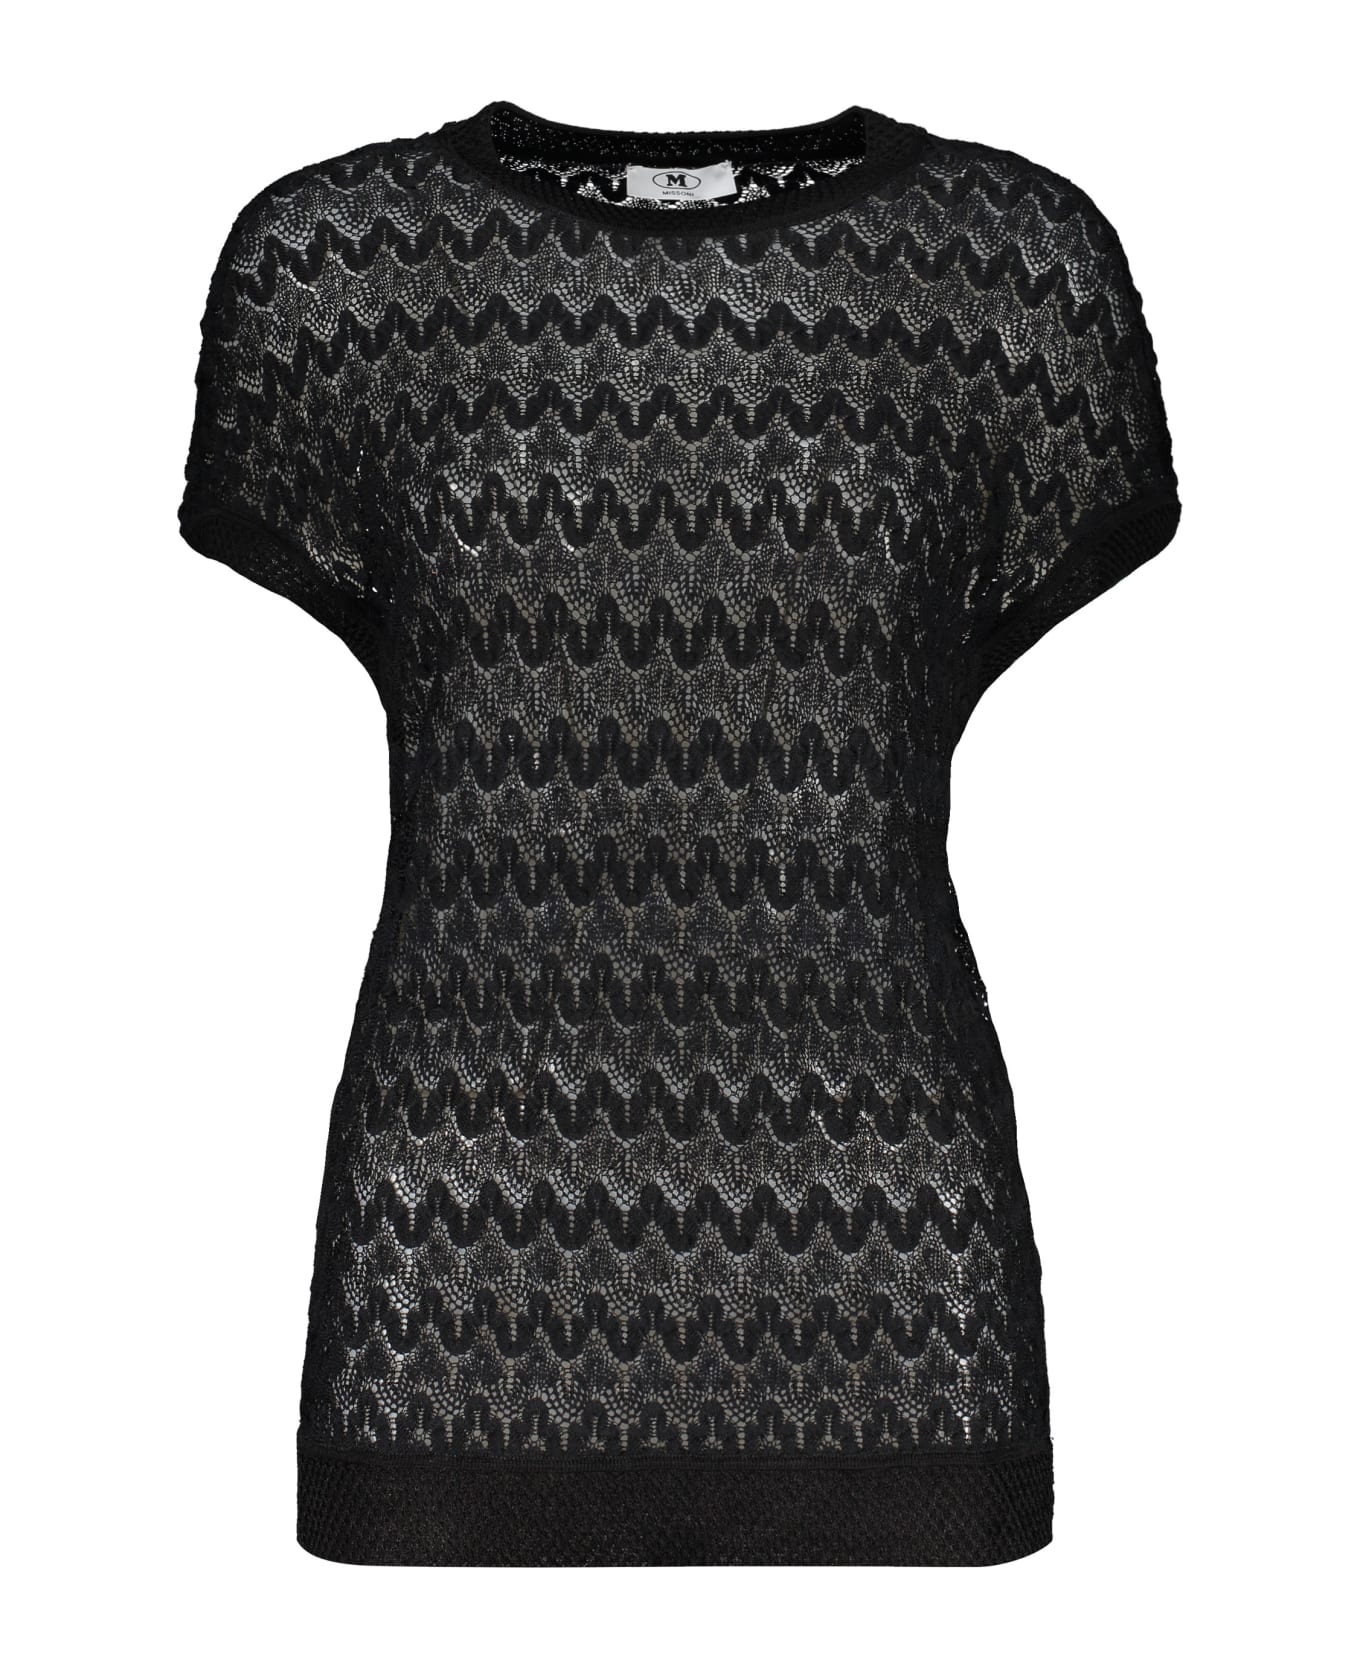 M Missoni Knitted Top - black